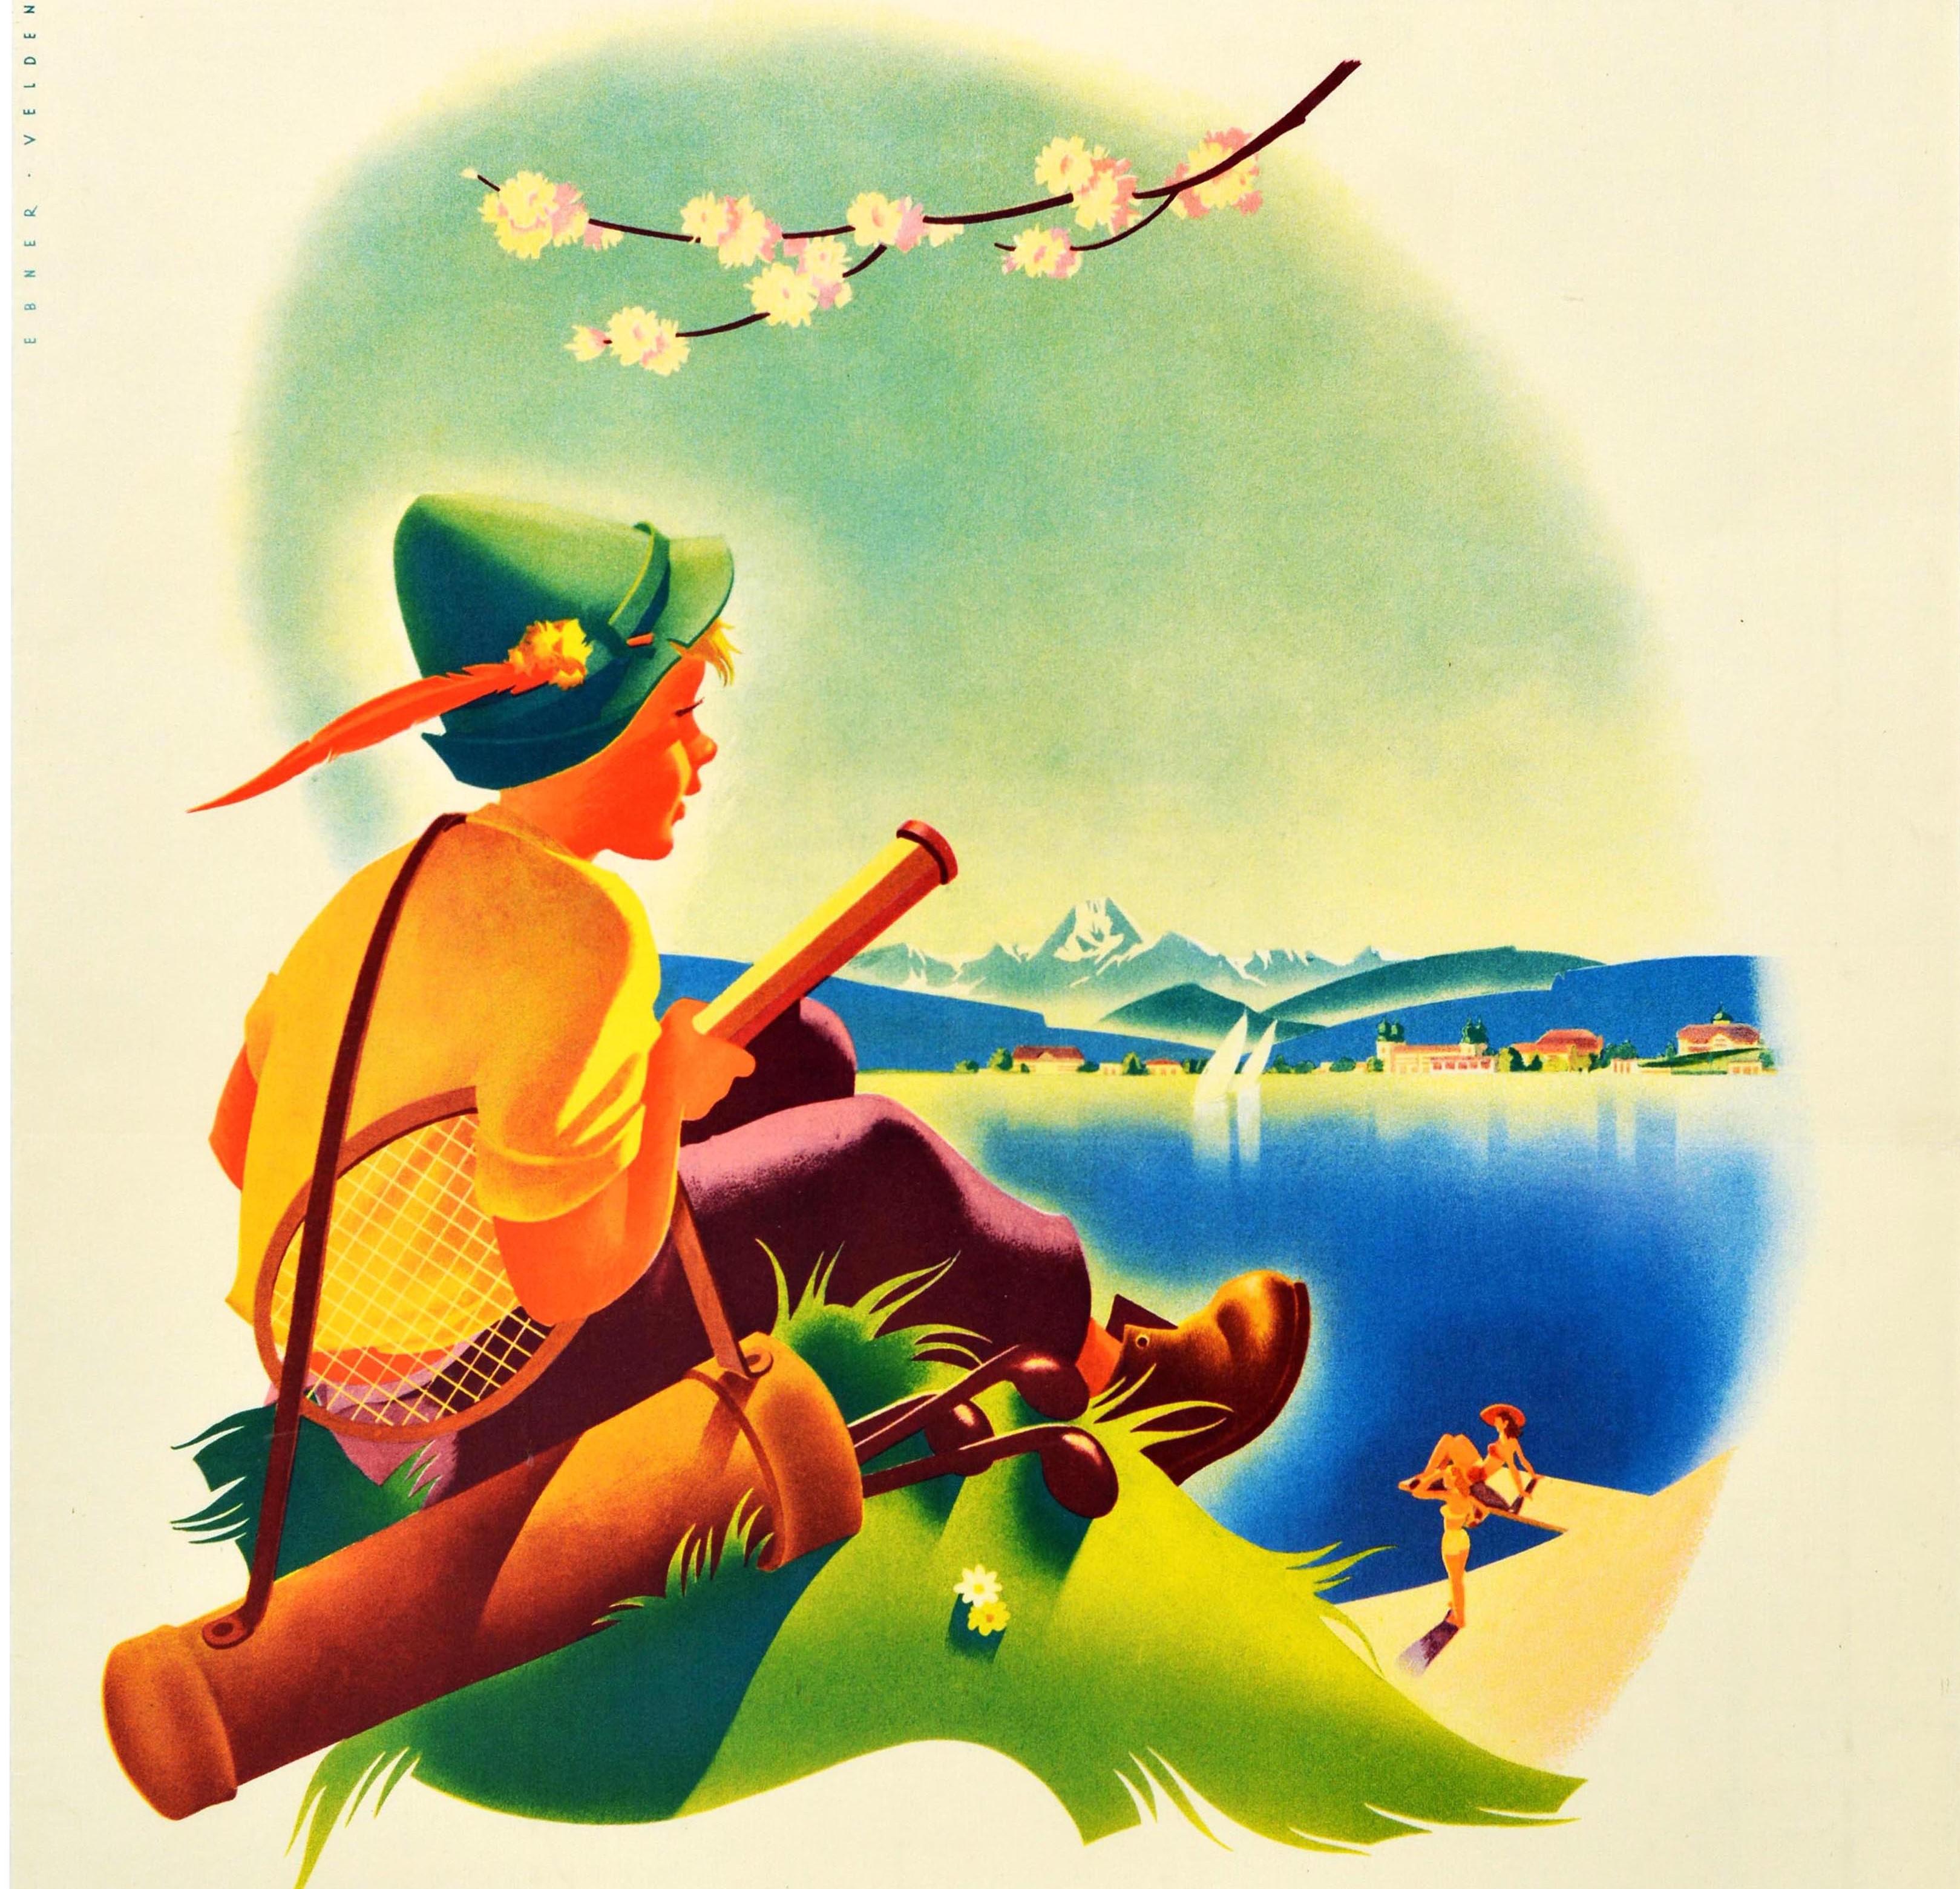 Original vintage travel poster promoting Velden Worther See - a market town on the shore of the Worthersee lake in Carinthia / Karnten Austria - showing a young boy in a traditional Austrian hat carrying golf clubs and a tennis racket on a grassy